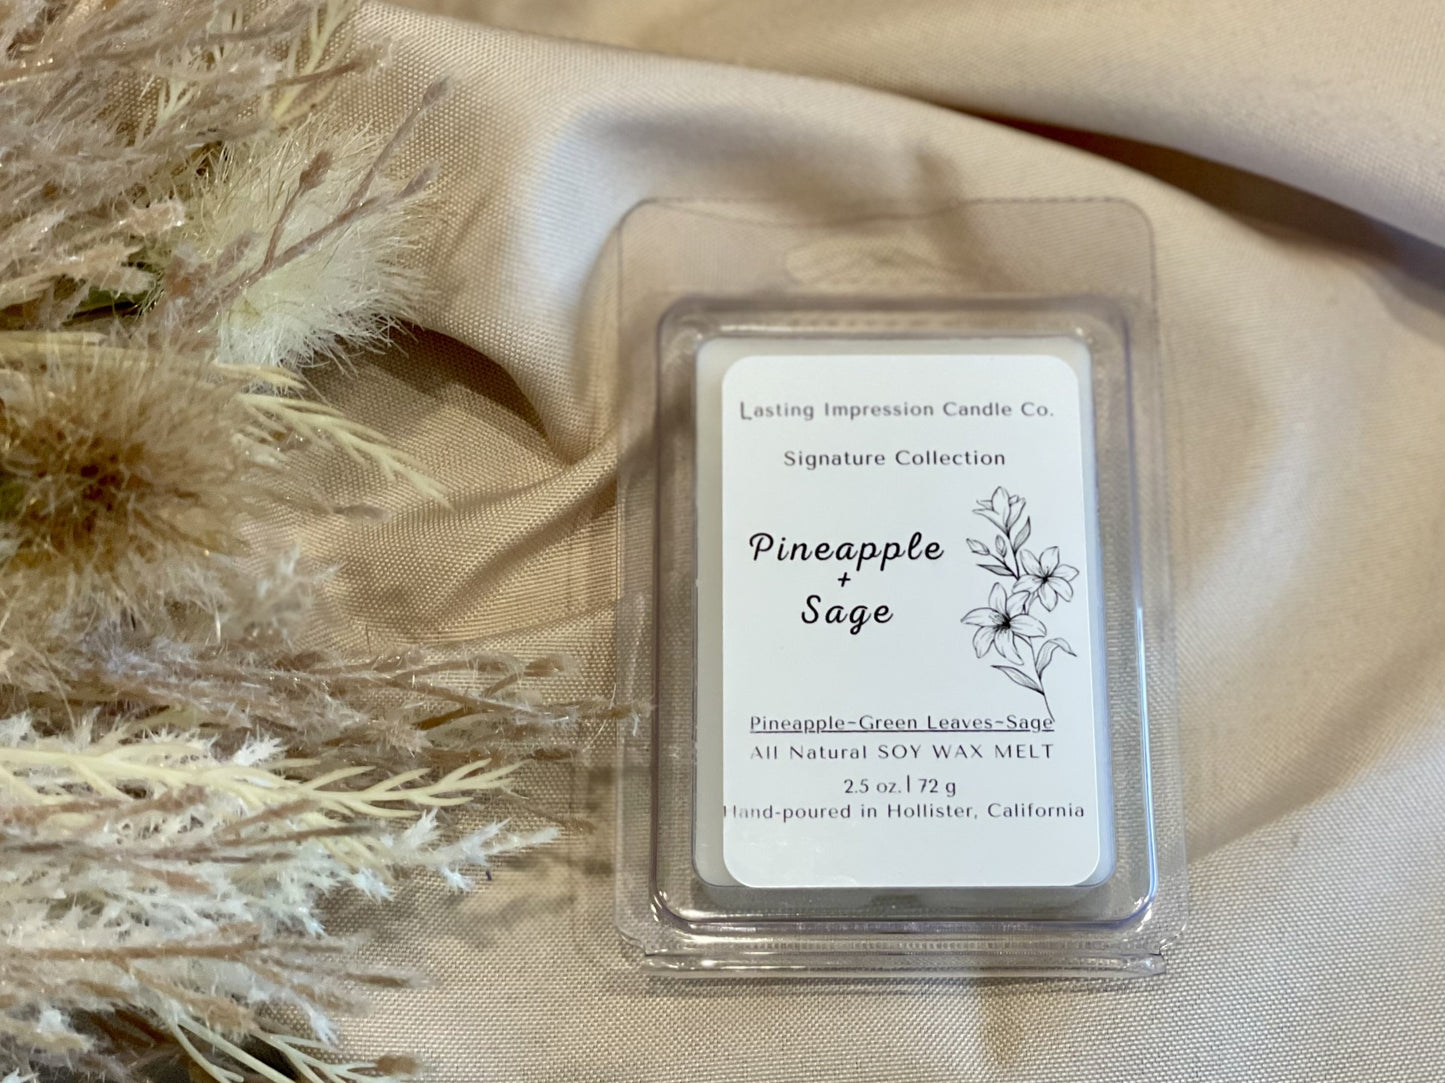 Cardamom & Cream Scented | Pure Soy Wax Melt